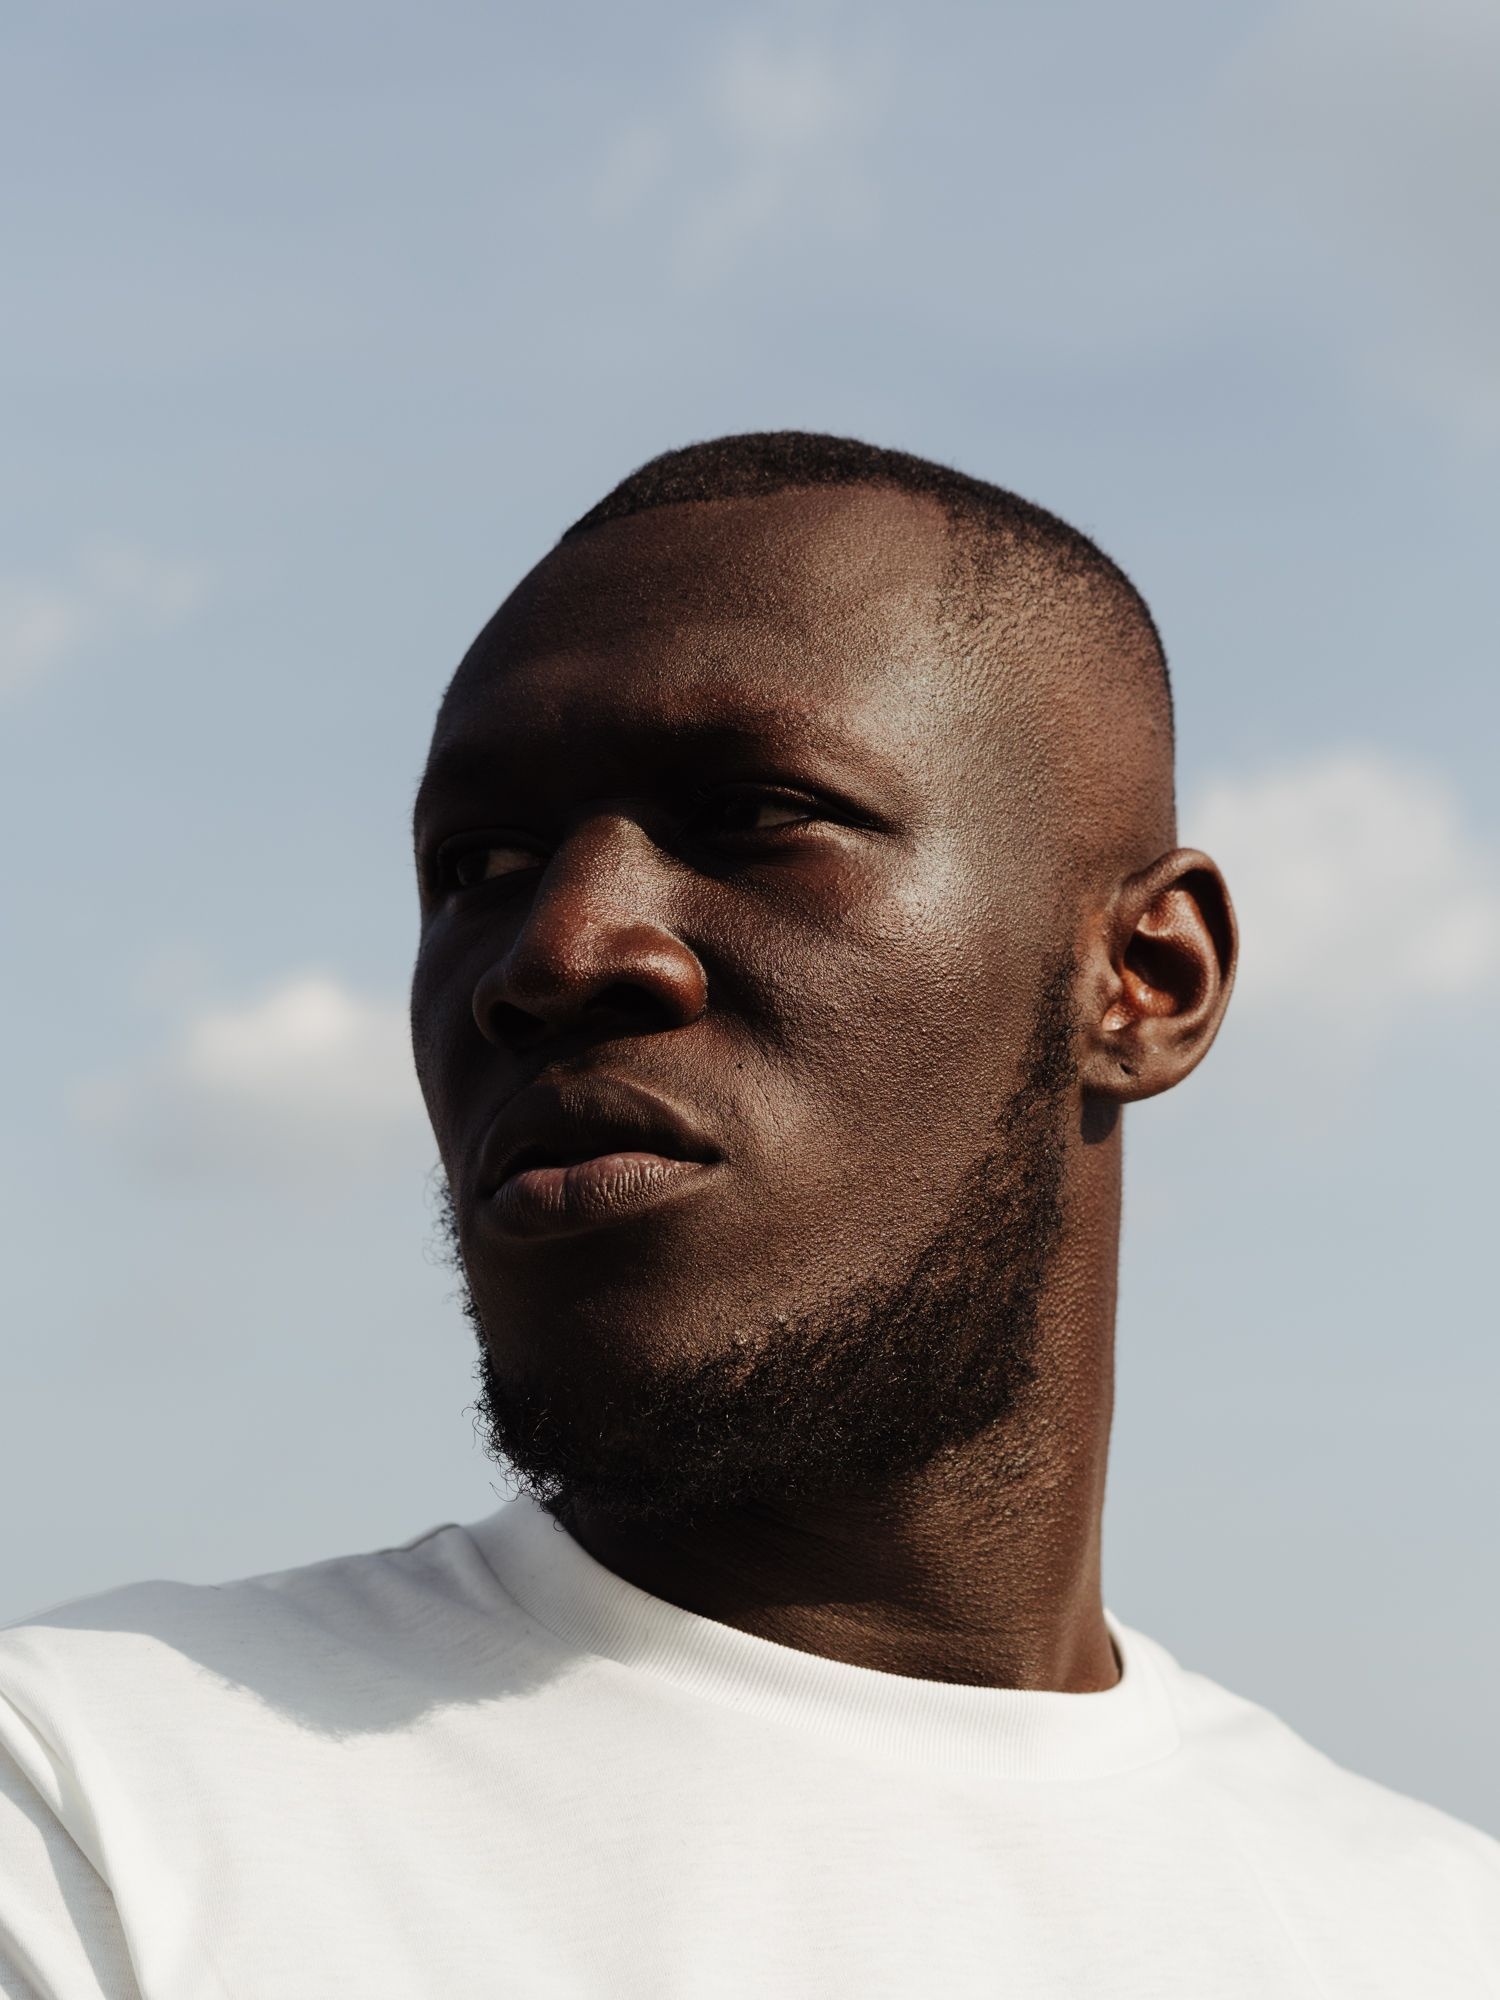 Stormzy Wallpapers - Top Free Stormzy Backgrounds 1500x2000